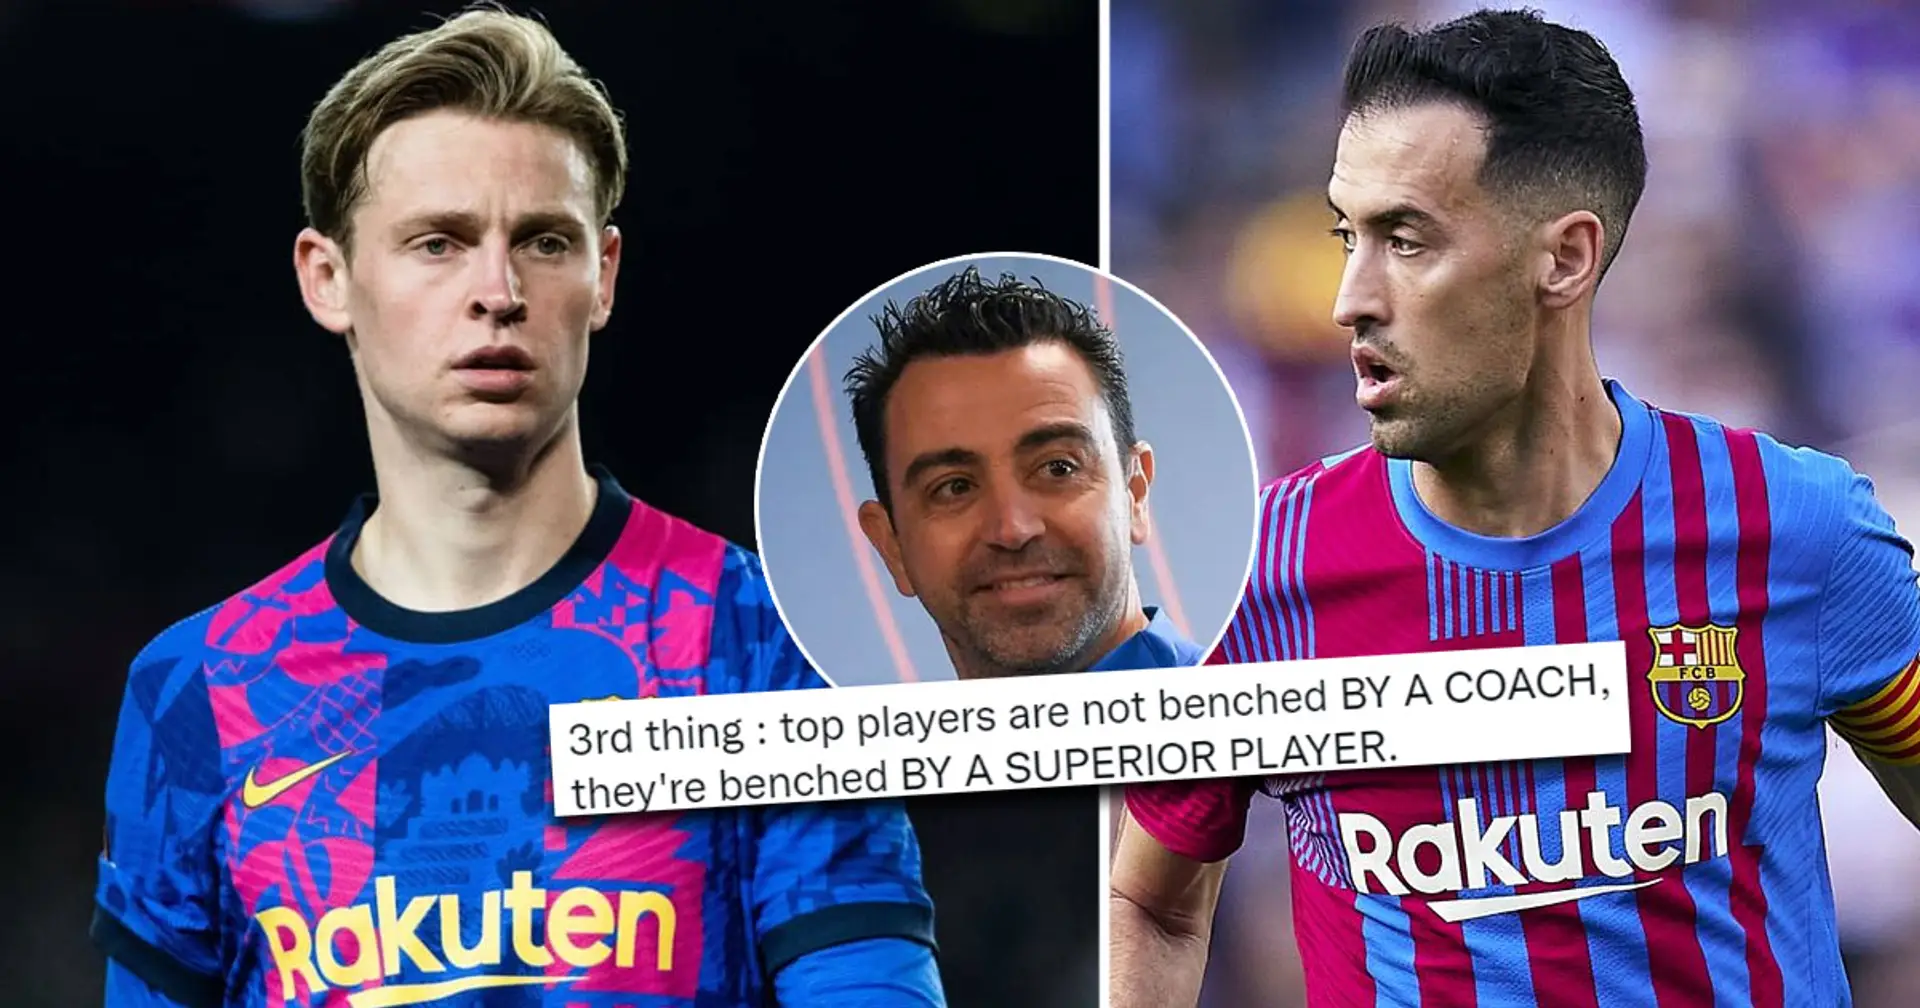 'It's becoming annoying': fan says that Barca shouldn't give in to De Jong's demands to play in Busquets role